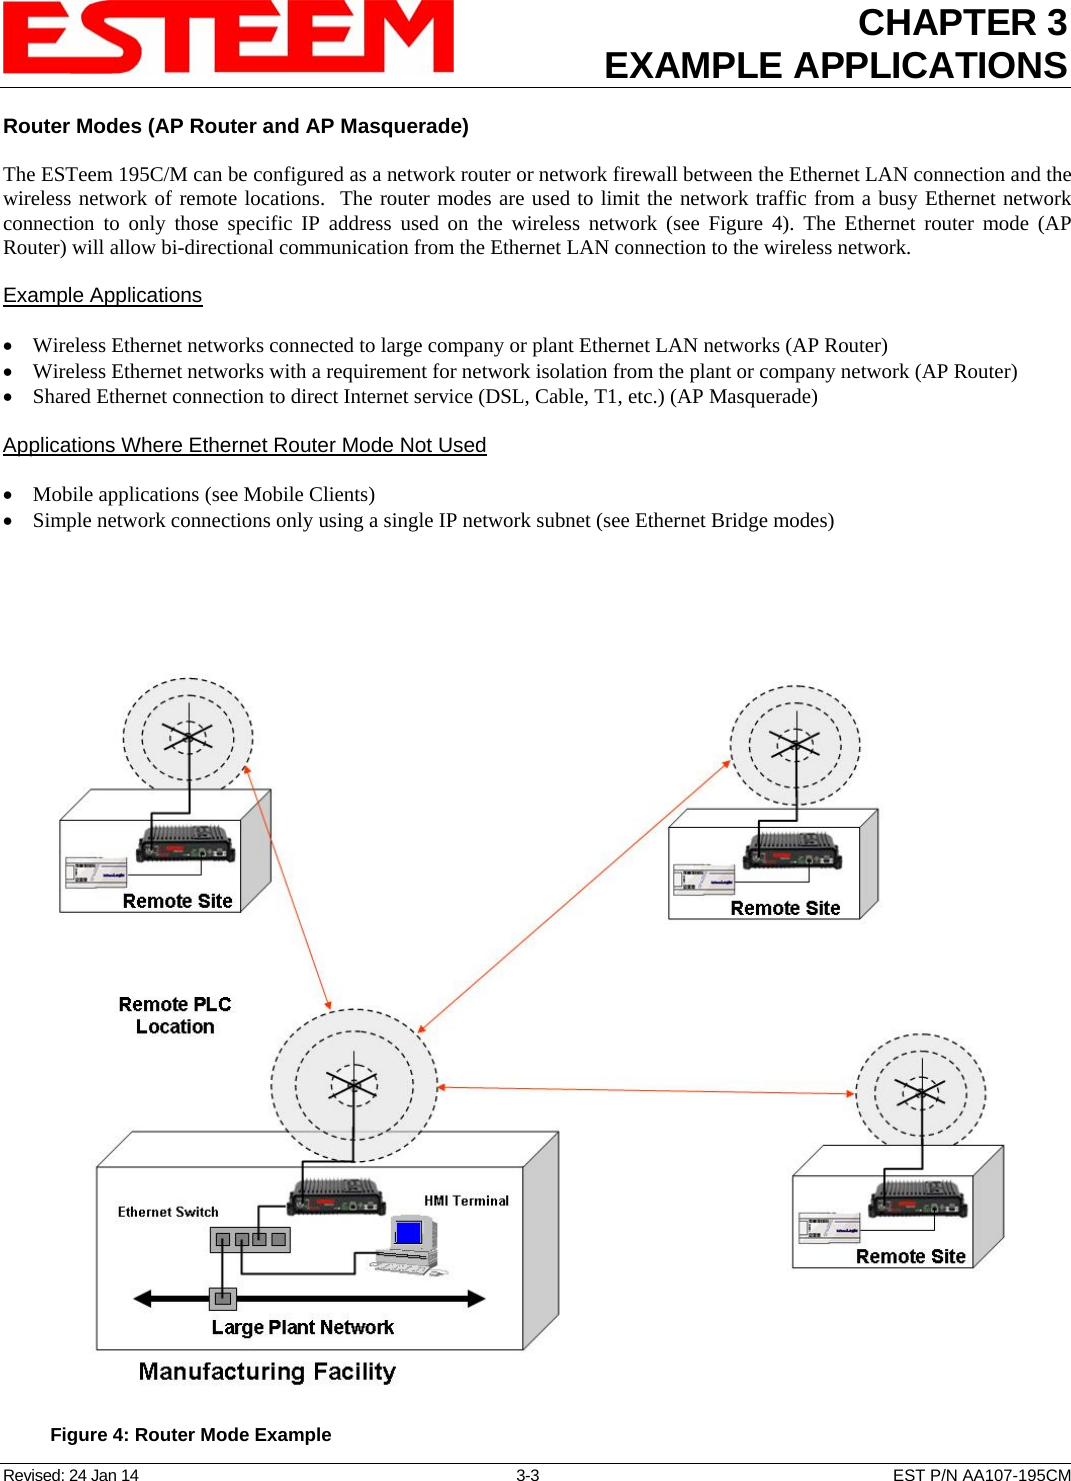 CHAPTER 3 EXAMPLE APPLICATIONS  Router Modes (AP Router and AP Masquerade)  The ESTeem 195C/M can be configured as a network router or network firewall between the Ethernet LAN connection and the wireless network of remote locations.  The router modes are used to limit the network traffic from a busy Ethernet network connection to only those specific IP address used on the wireless network (see Figure 4). The Ethernet router mode (AP Router) will allow bi-directional communication from the Ethernet LAN connection to the wireless network.  Example Applications   Wireless Ethernet networks connected to large company or plant Ethernet LAN networks (AP Router)  Wireless Ethernet networks with a requirement for network isolation from the plant or company network (AP Router)  Shared Ethernet connection to direct Internet service (DSL, Cable, T1, etc.) (AP Masquerade)  Applications Where Ethernet Router Mode Not Used   Mobile applications (see Mobile Clients)  Simple network connections only using a single IP network subnet (see Ethernet Bridge modes)    Figure 4: Router Mode Example Revised: 24 Jan 14  3-3  EST P/N AA107-195CM 